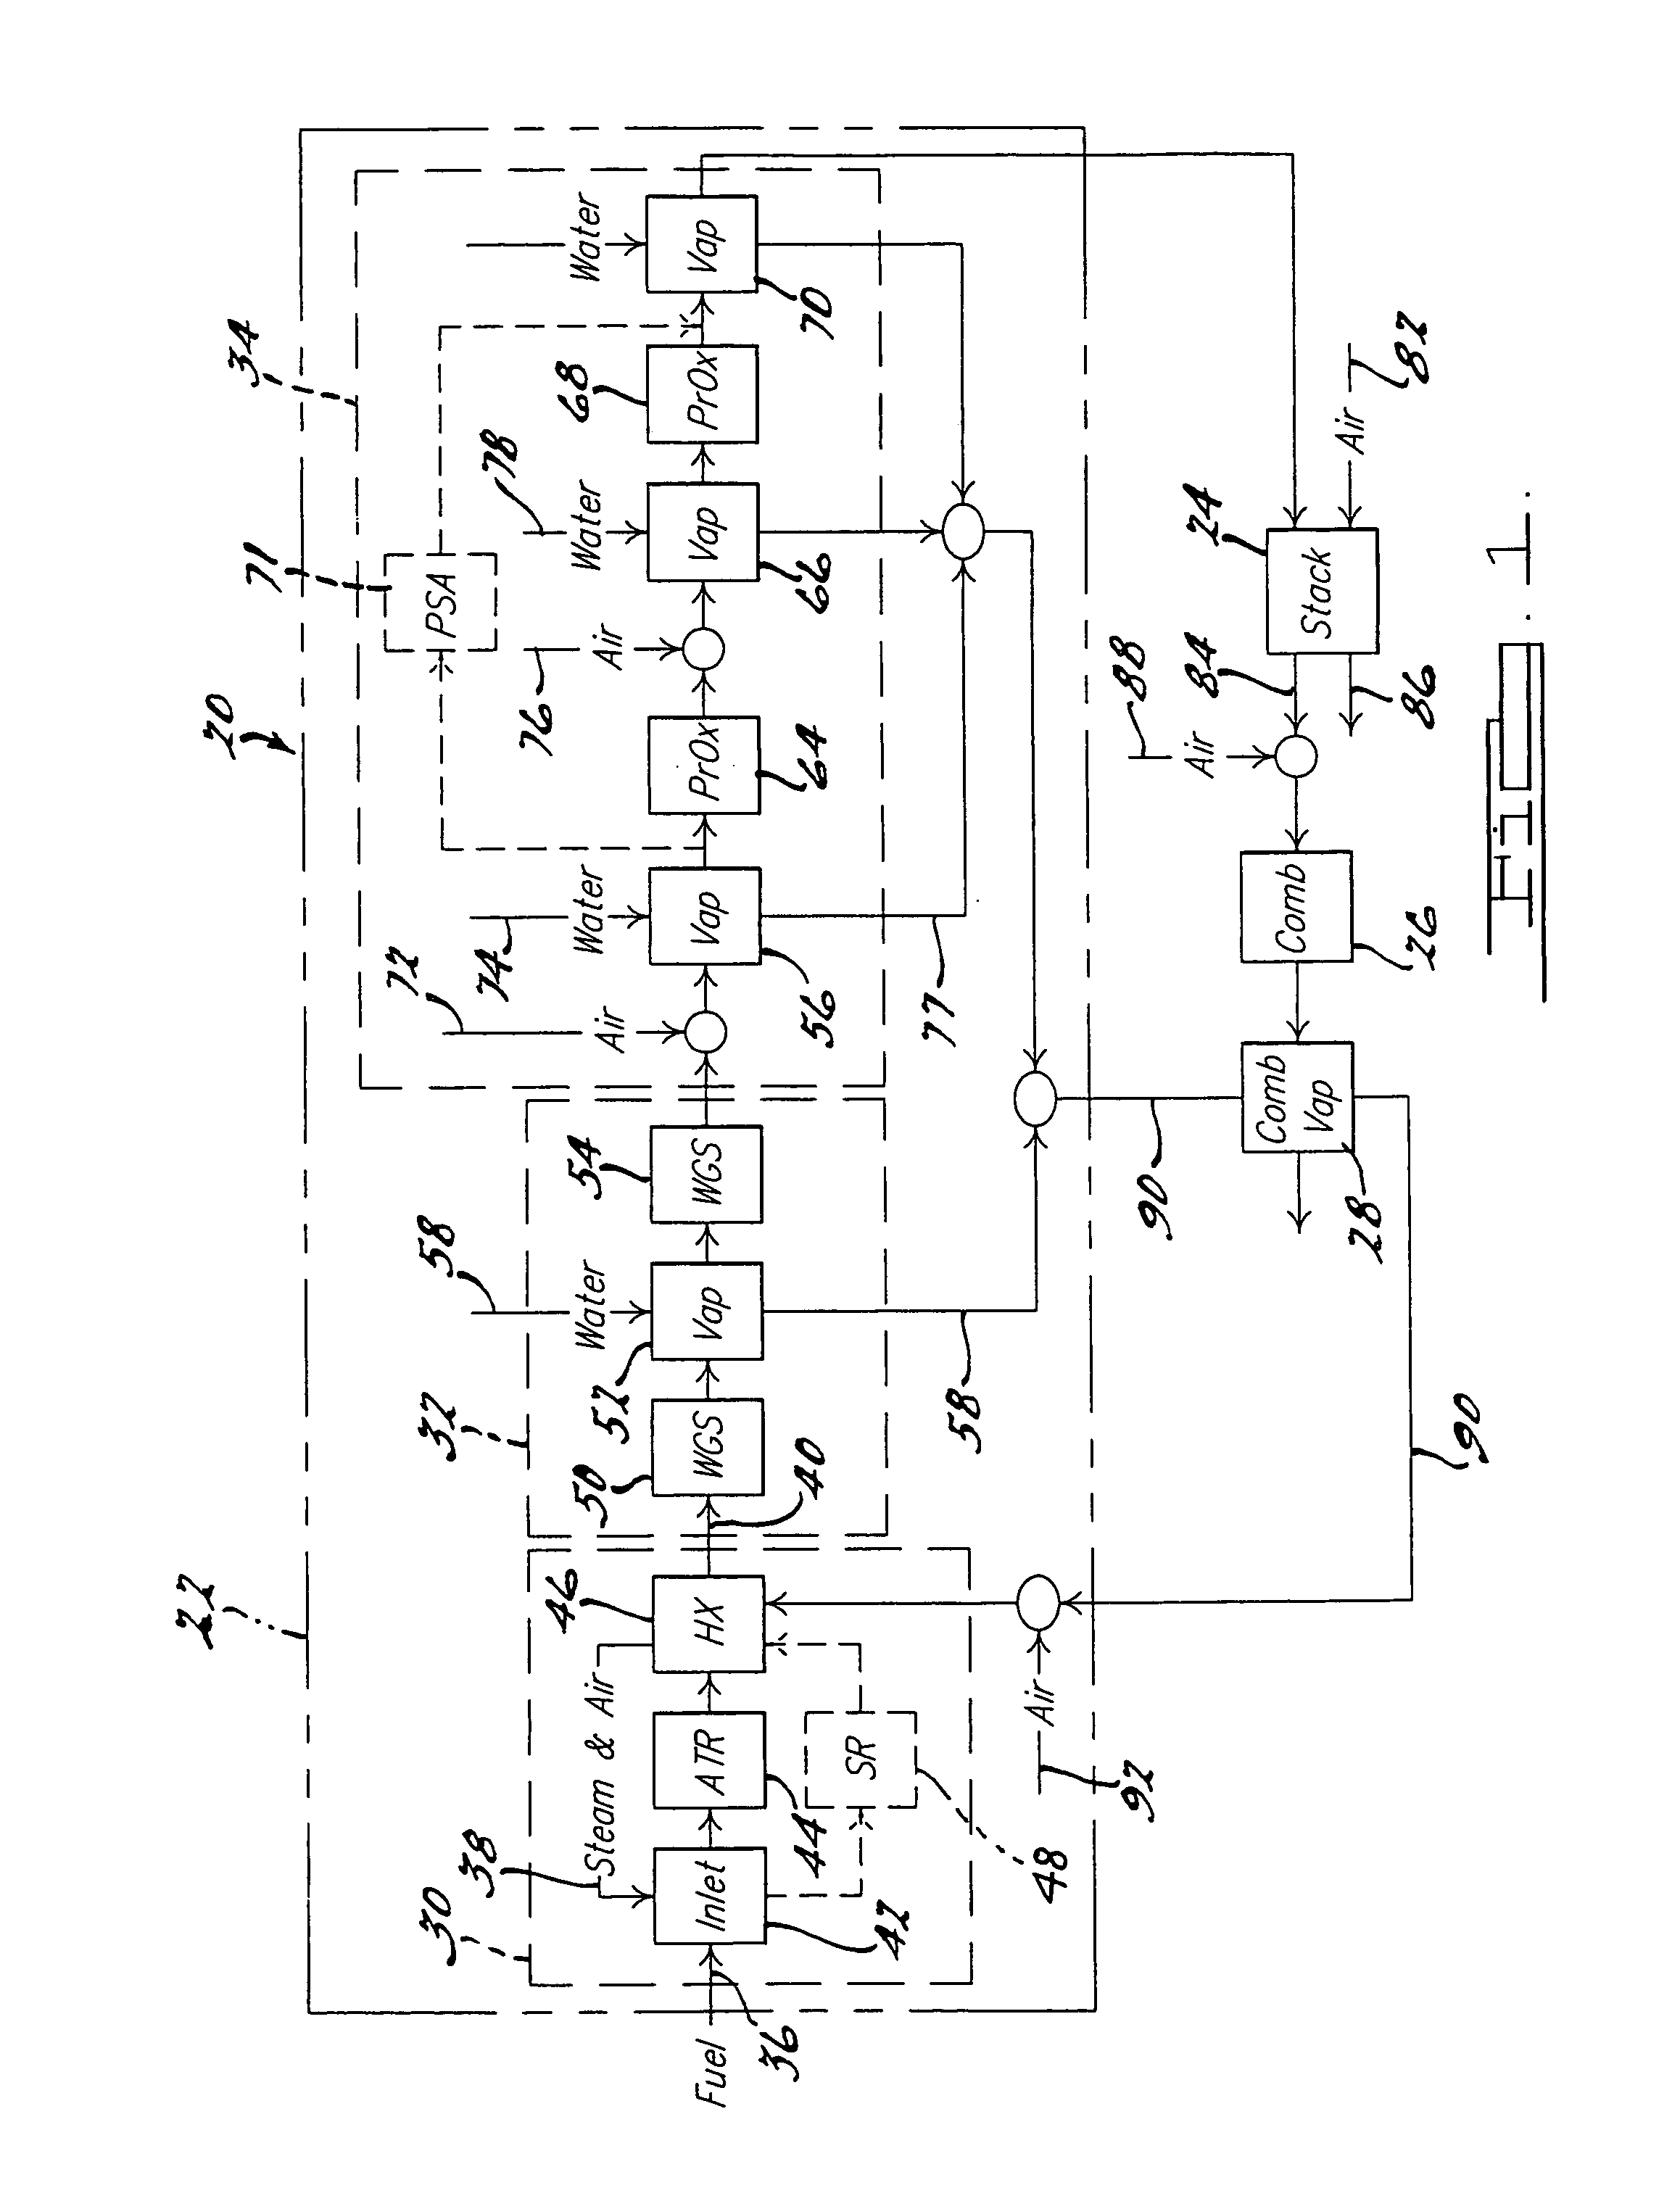 Compact water vaporizer for dynamic steam generation and uniform temperature control